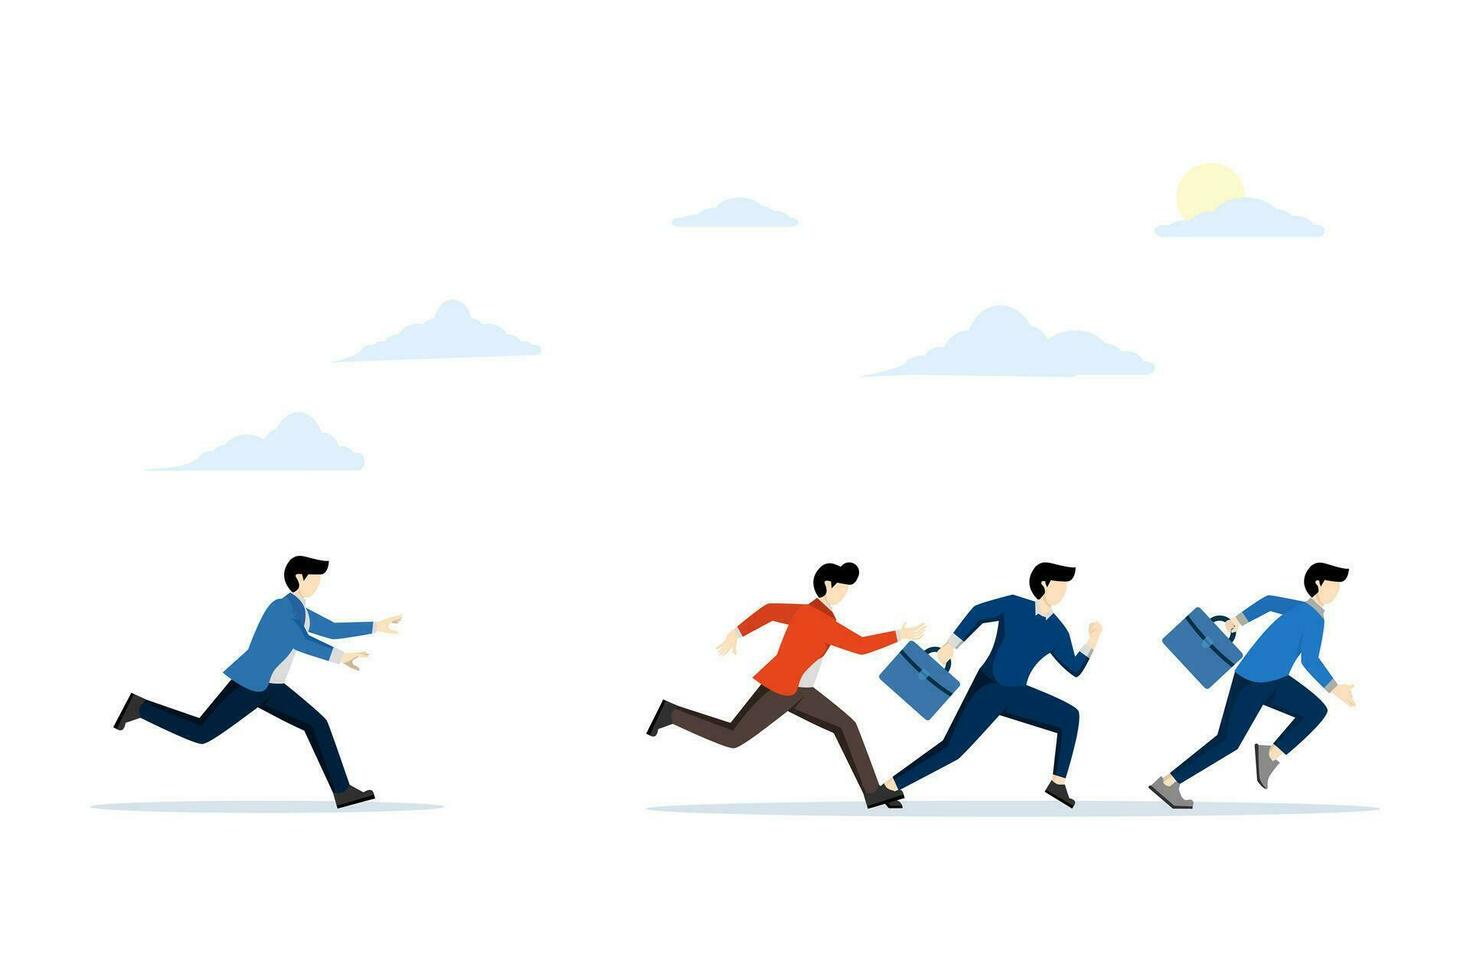 the concept of rivalry or competition in business, a group of people compete with other business people, overcome obstacles, fall behind catch them, flat vector illustration on a white background.